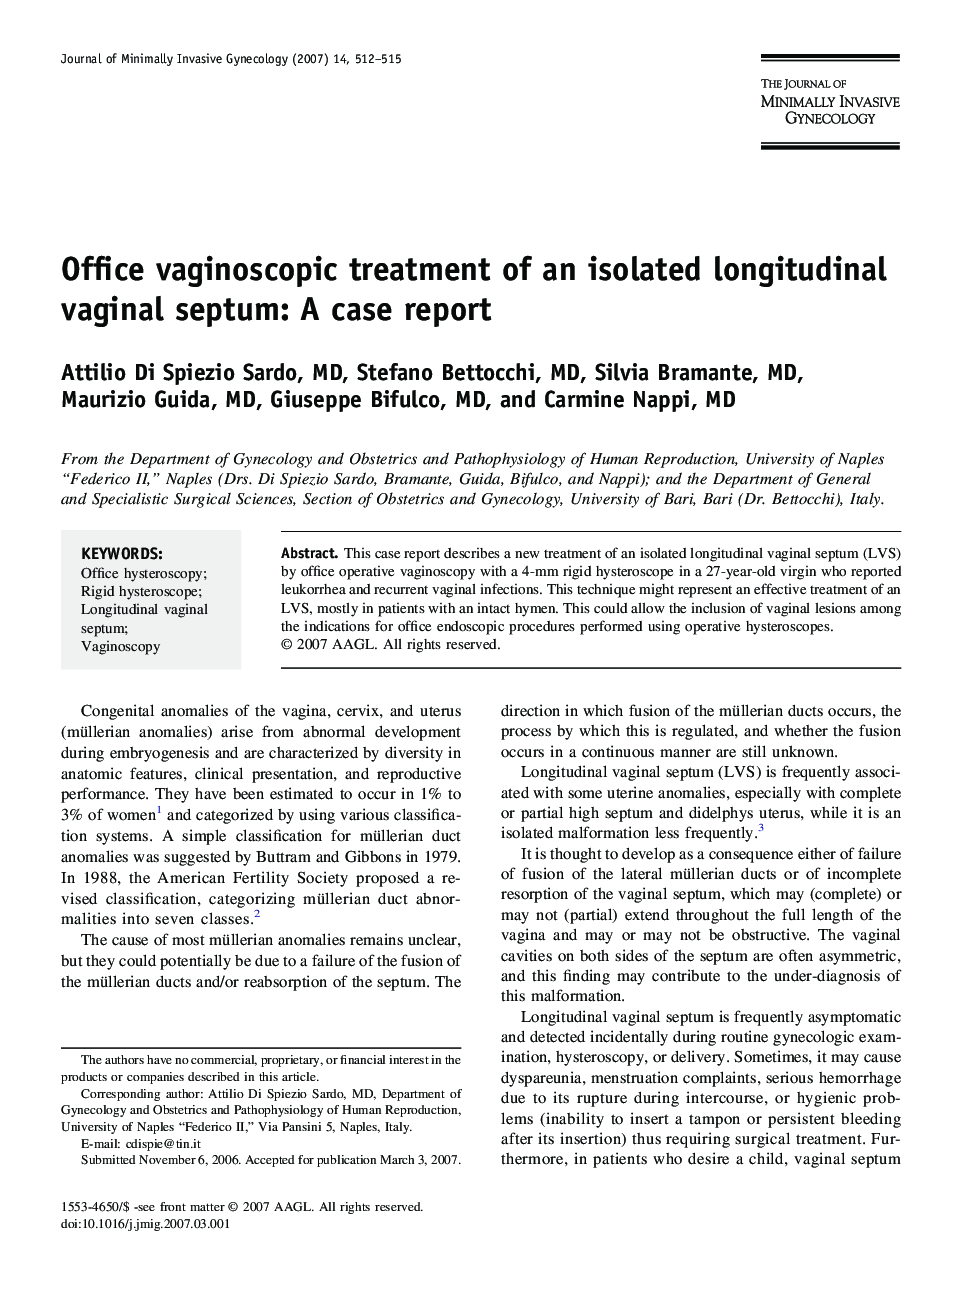 Office vaginoscopic treatment of an isolated longitudinal vaginal septum: A case report